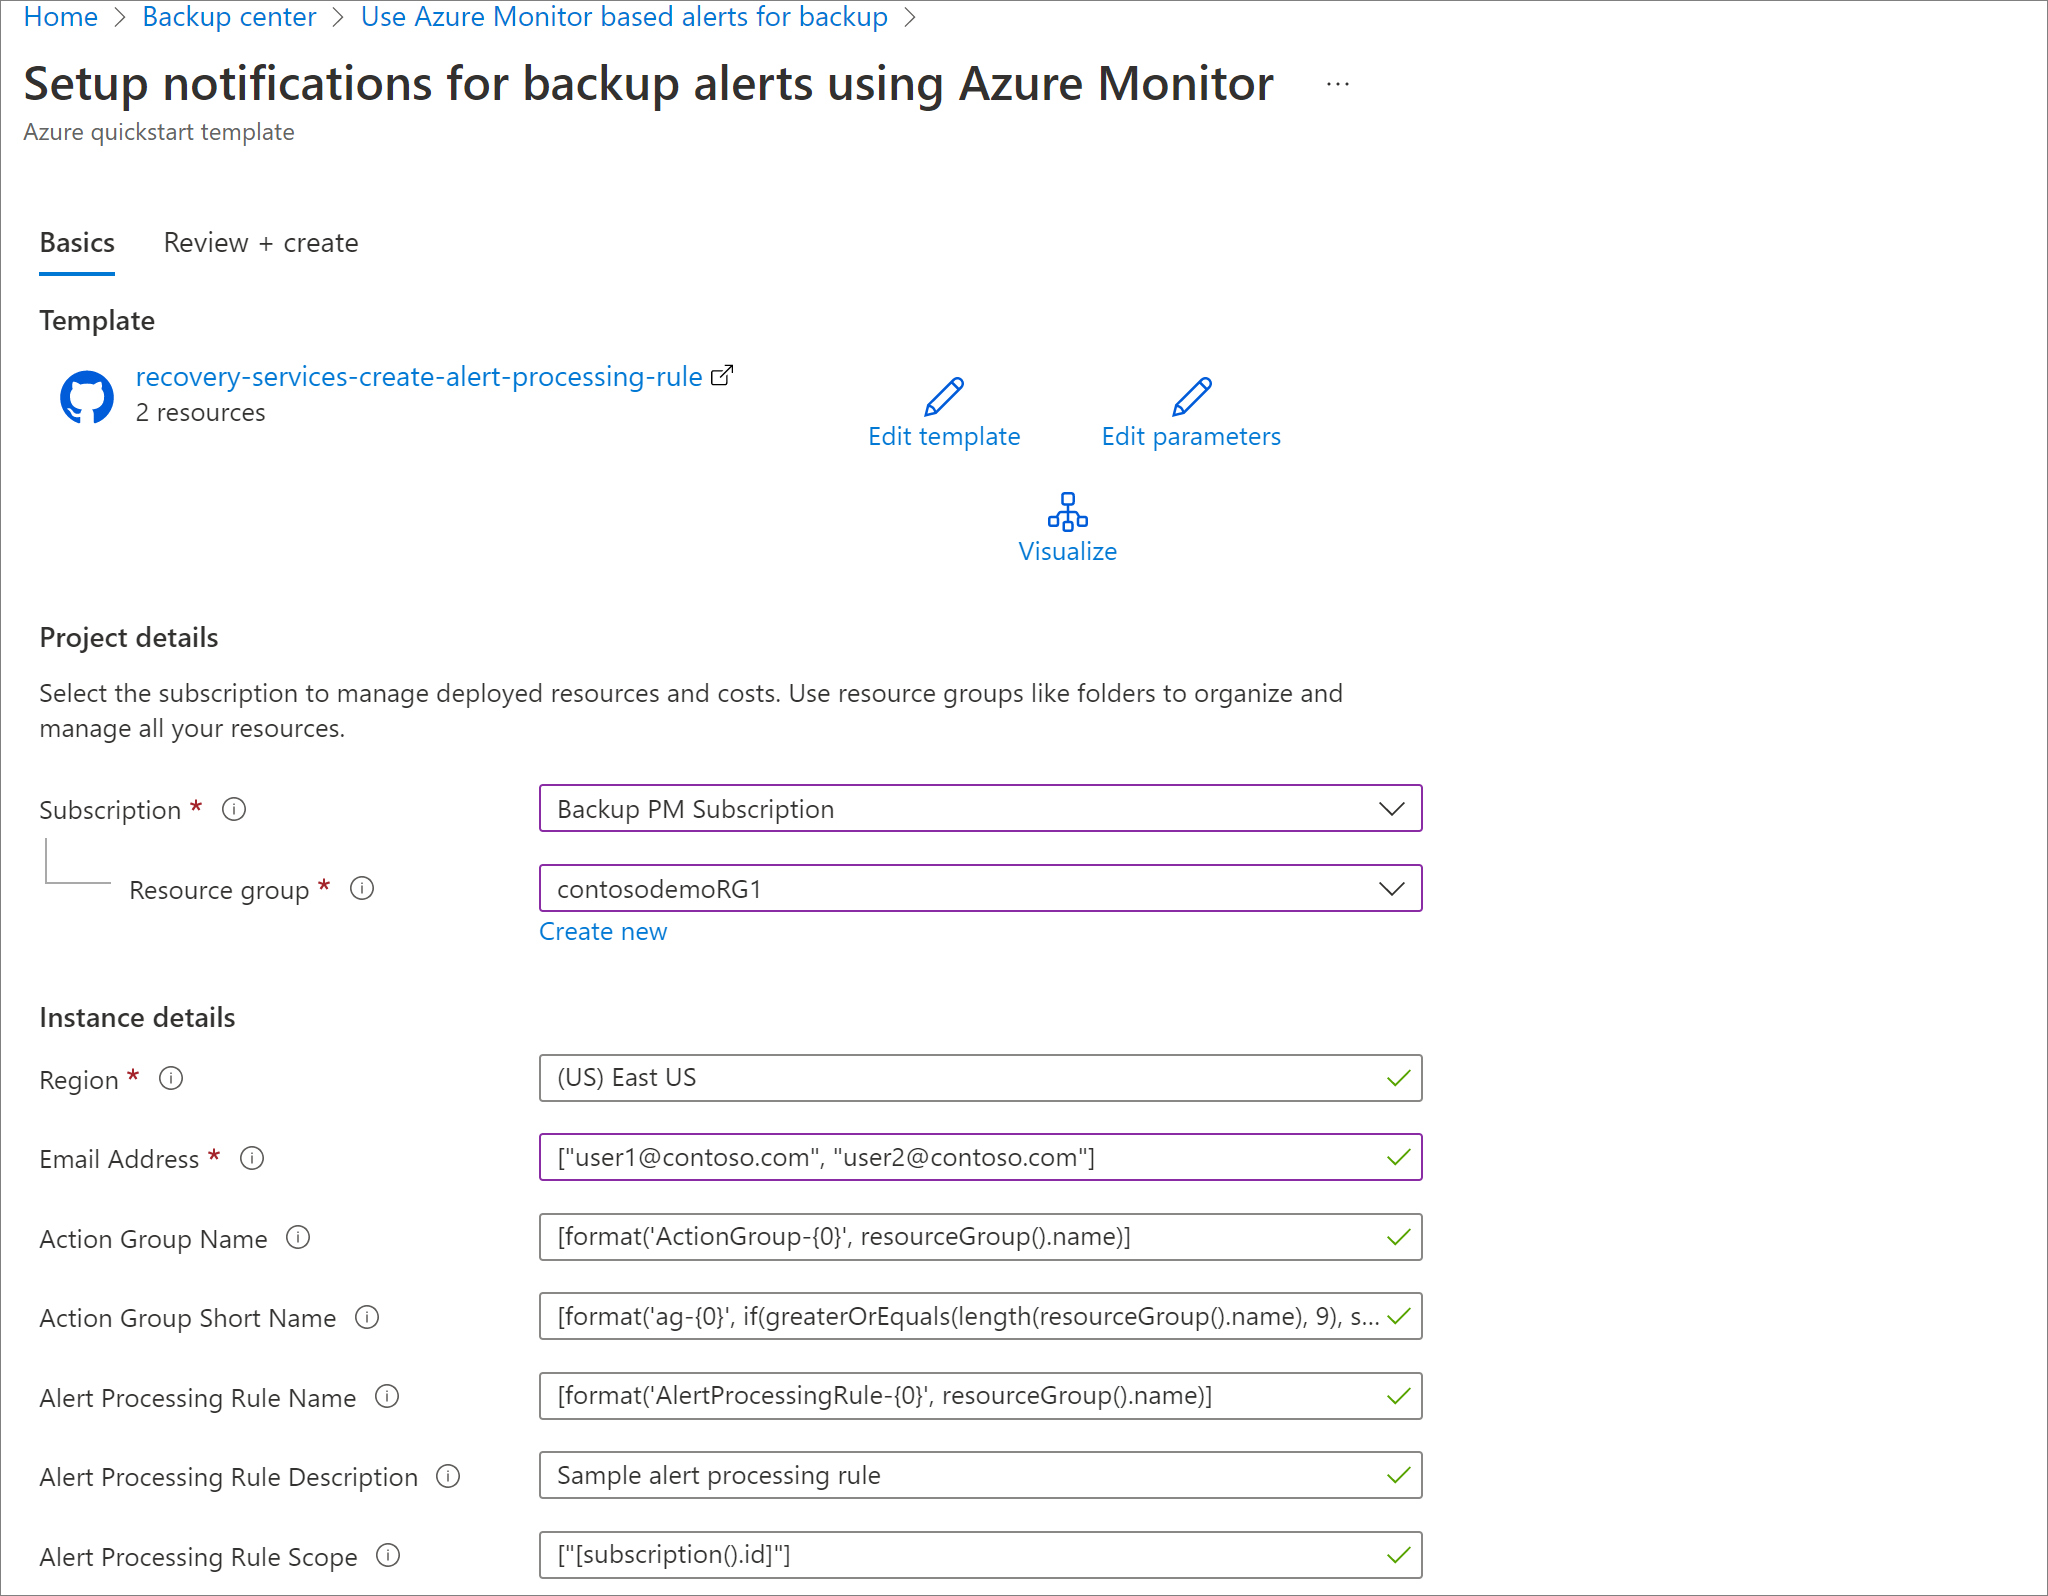 Screenshot showing template parameters to set up notification rules for Azure Monitor alerts.